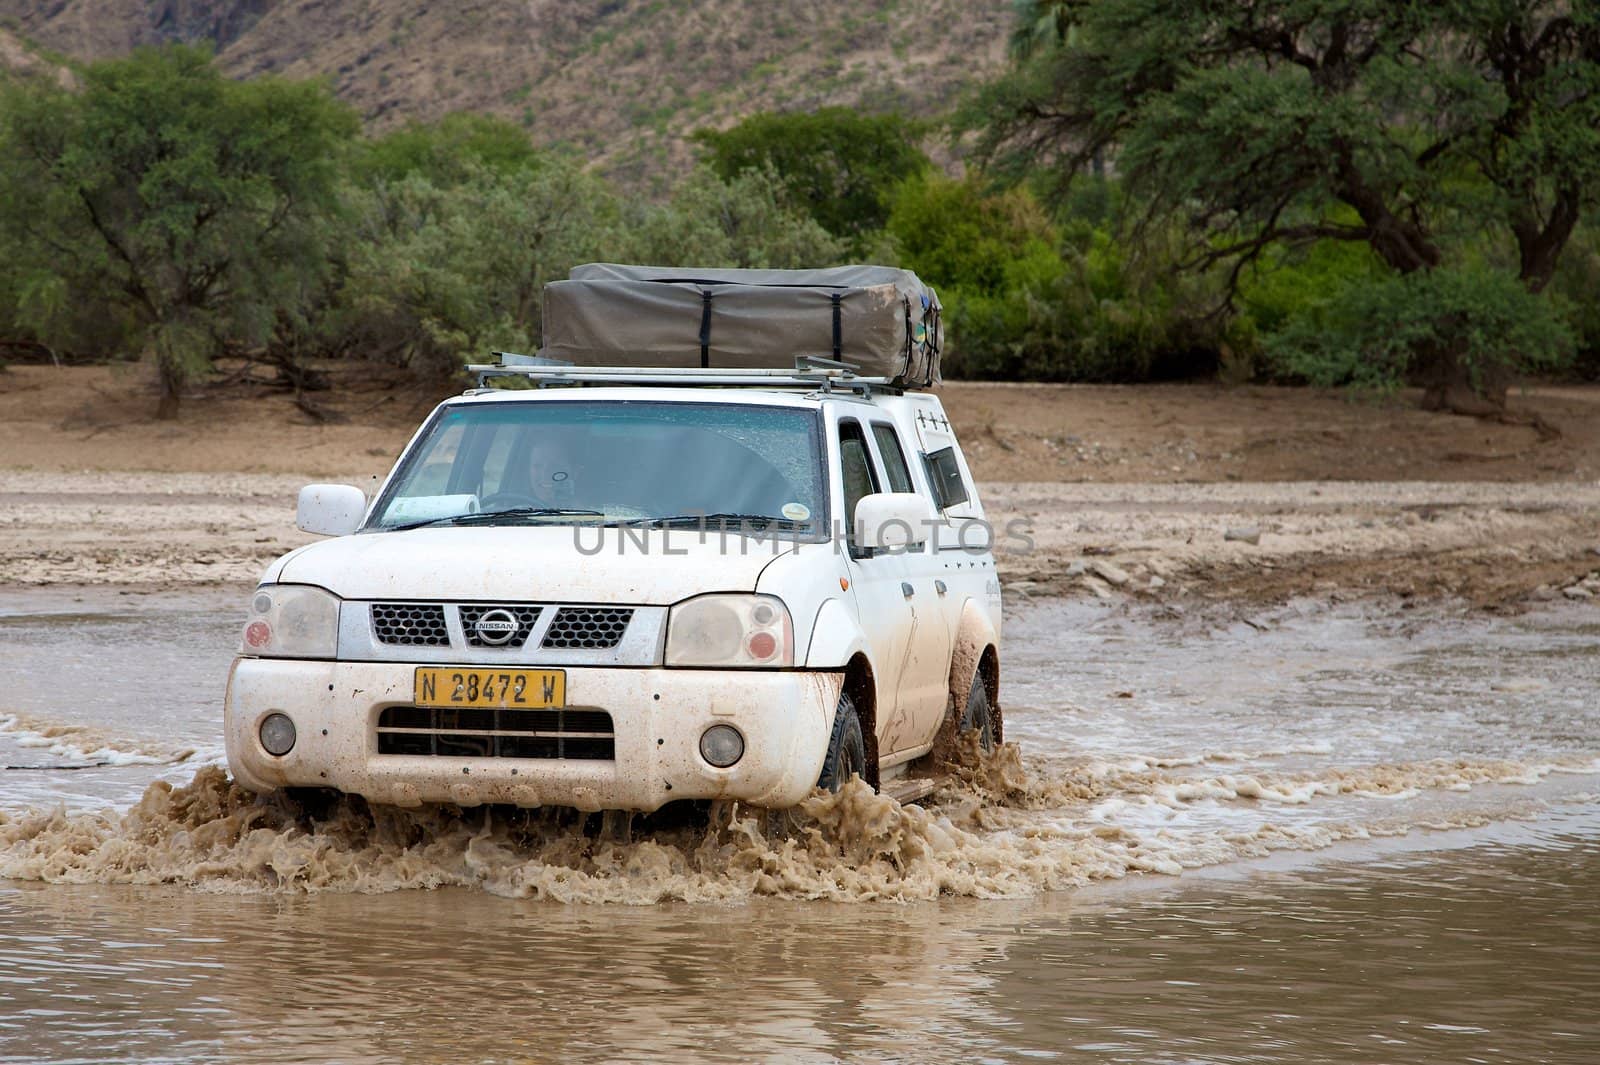 Crossing of a river by 4x4 by watchtheworld